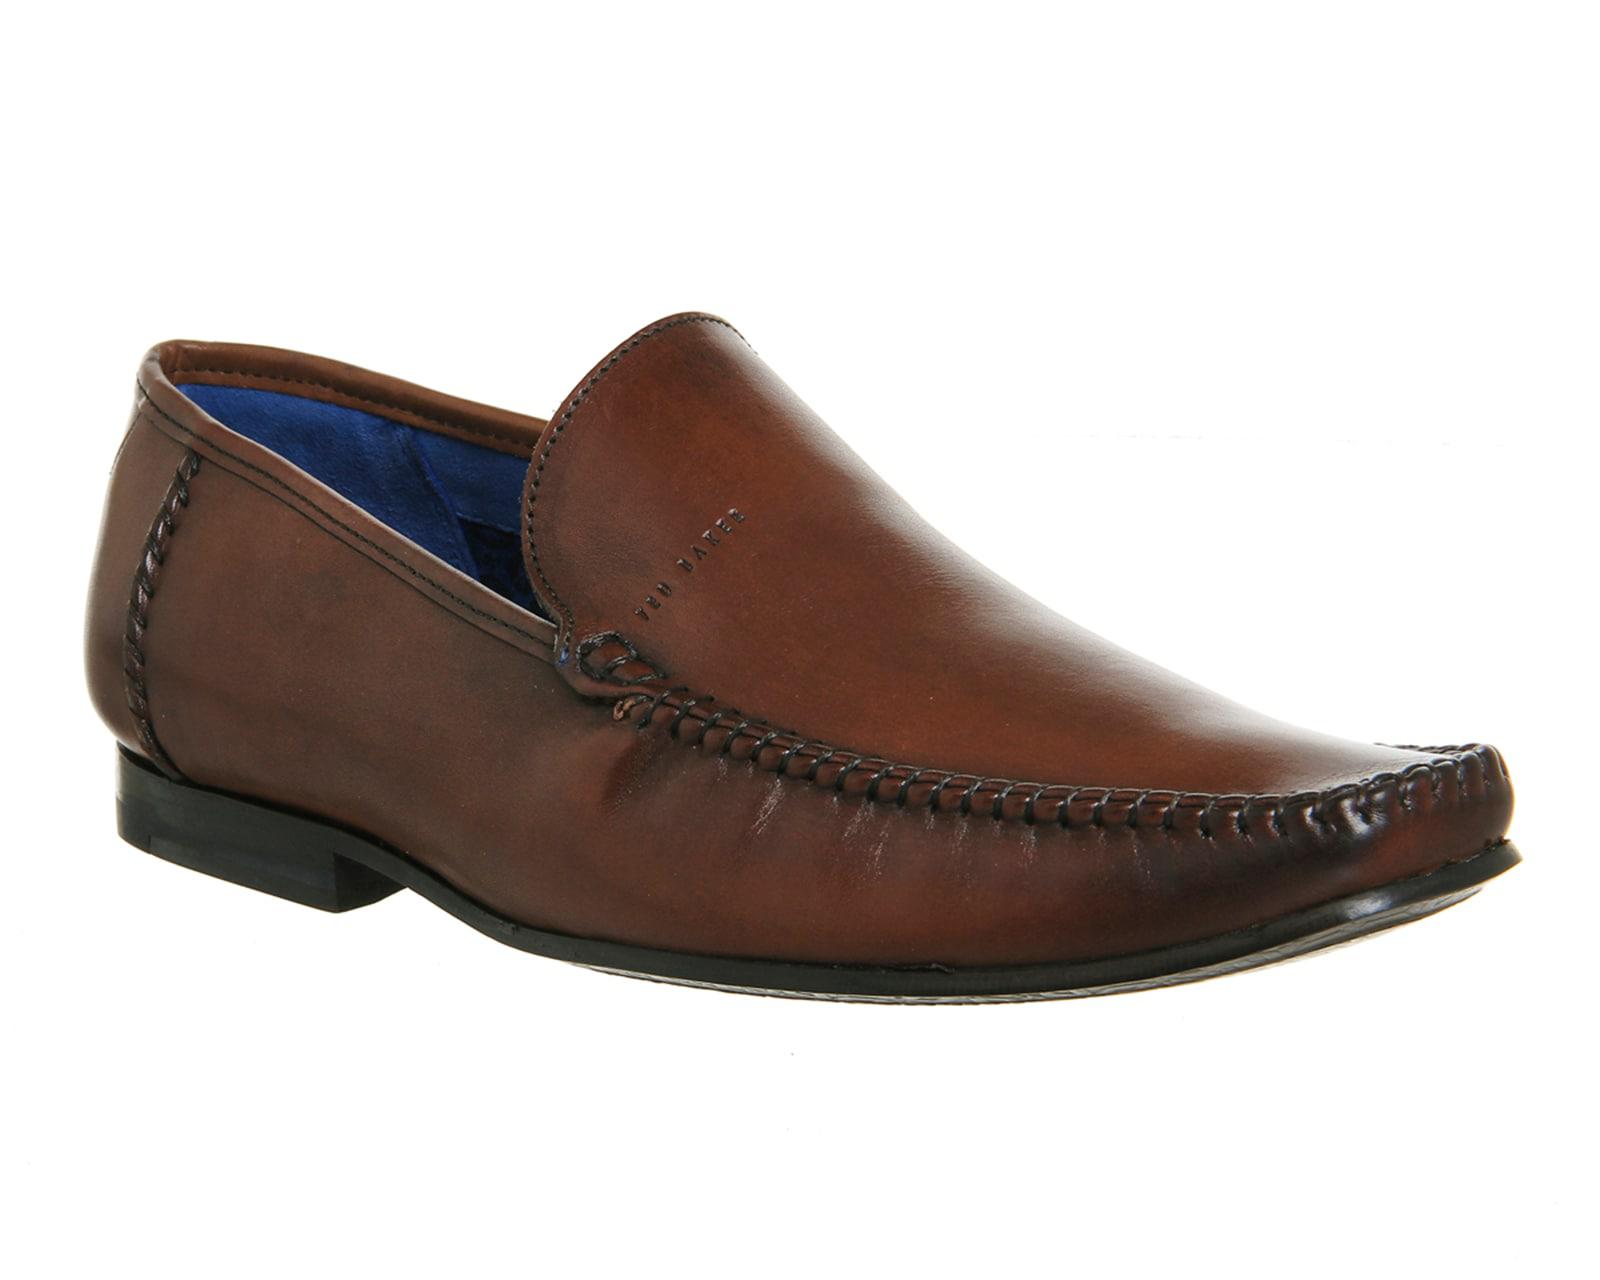 Ted Baker Leather Bly 8 Loafers in Brown for Men - Lyst